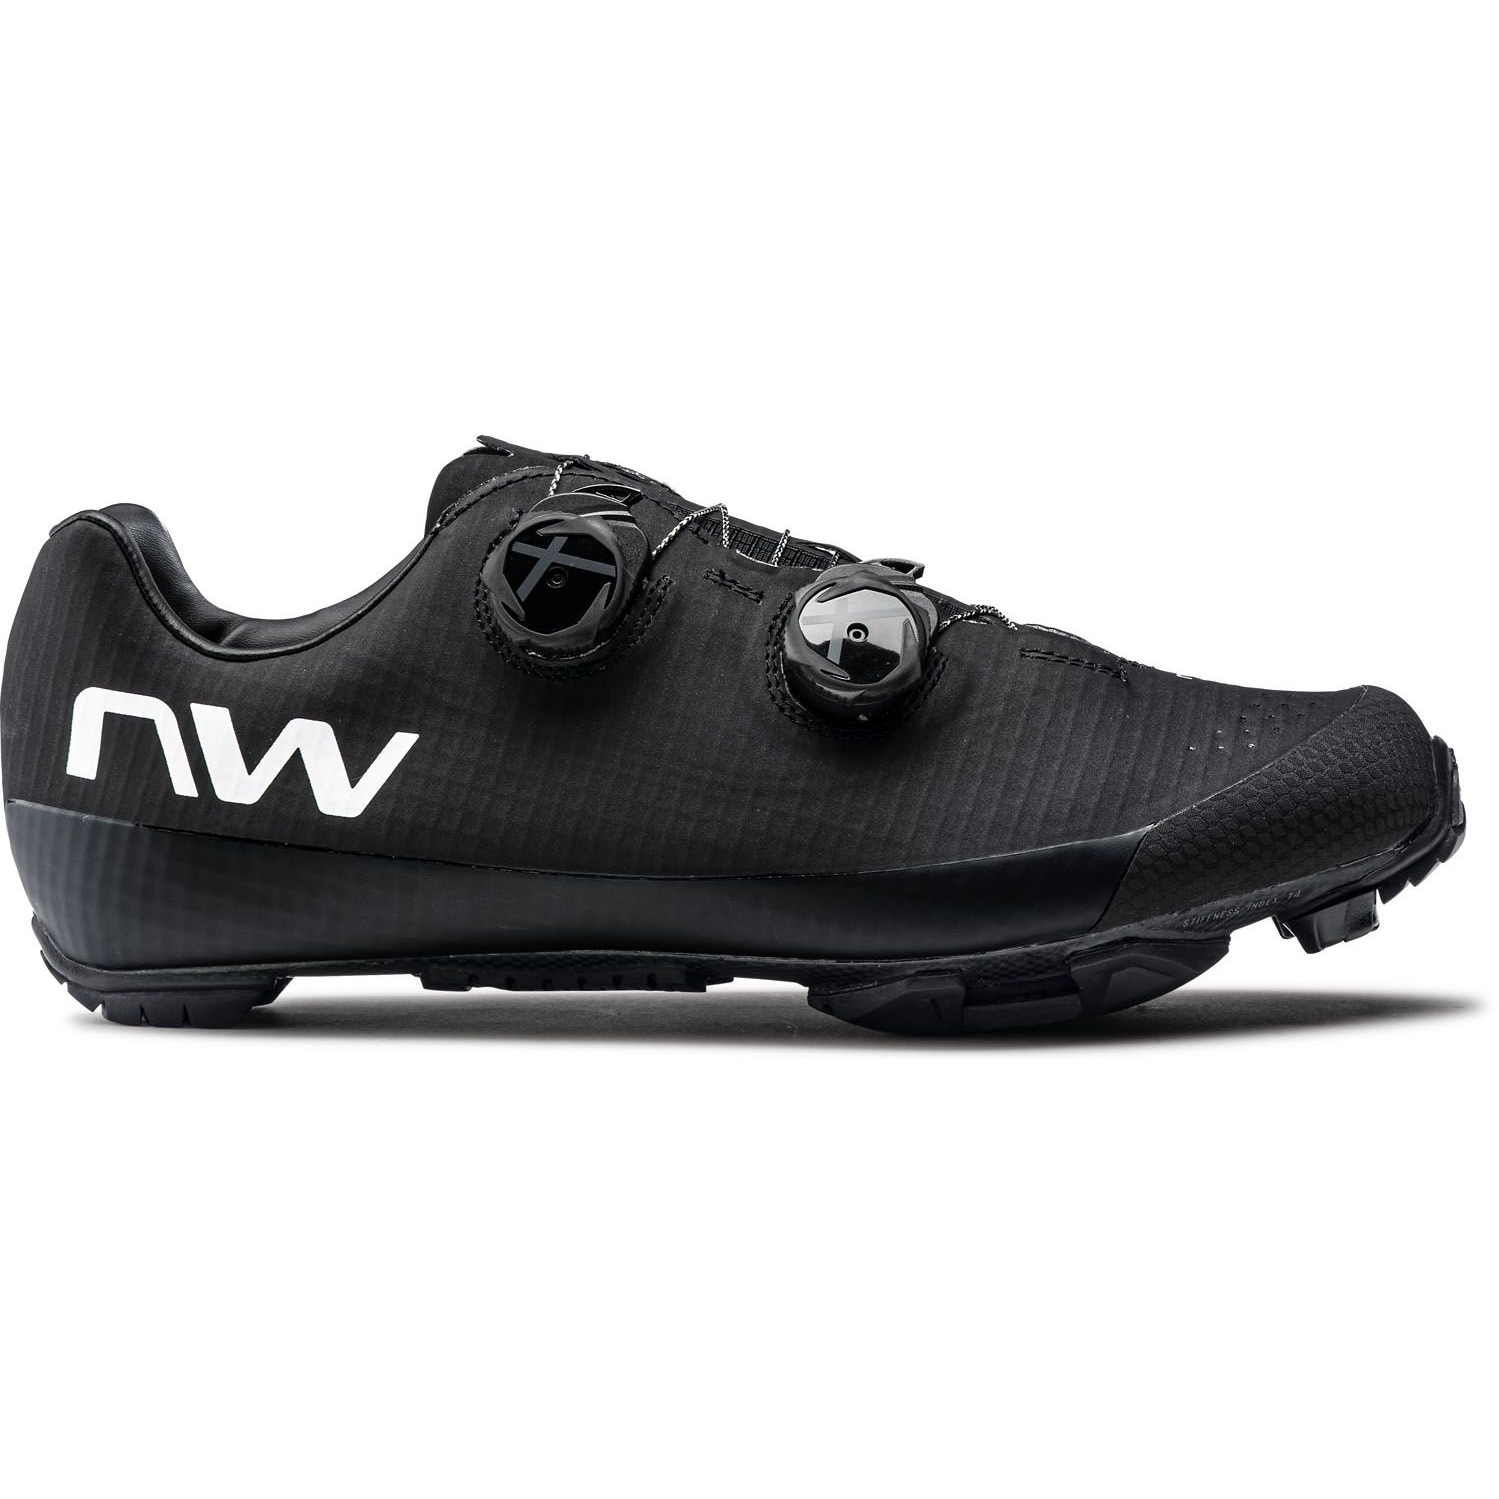 Picture of Northwave Extreme XC 2 MTB Shoes - black 10